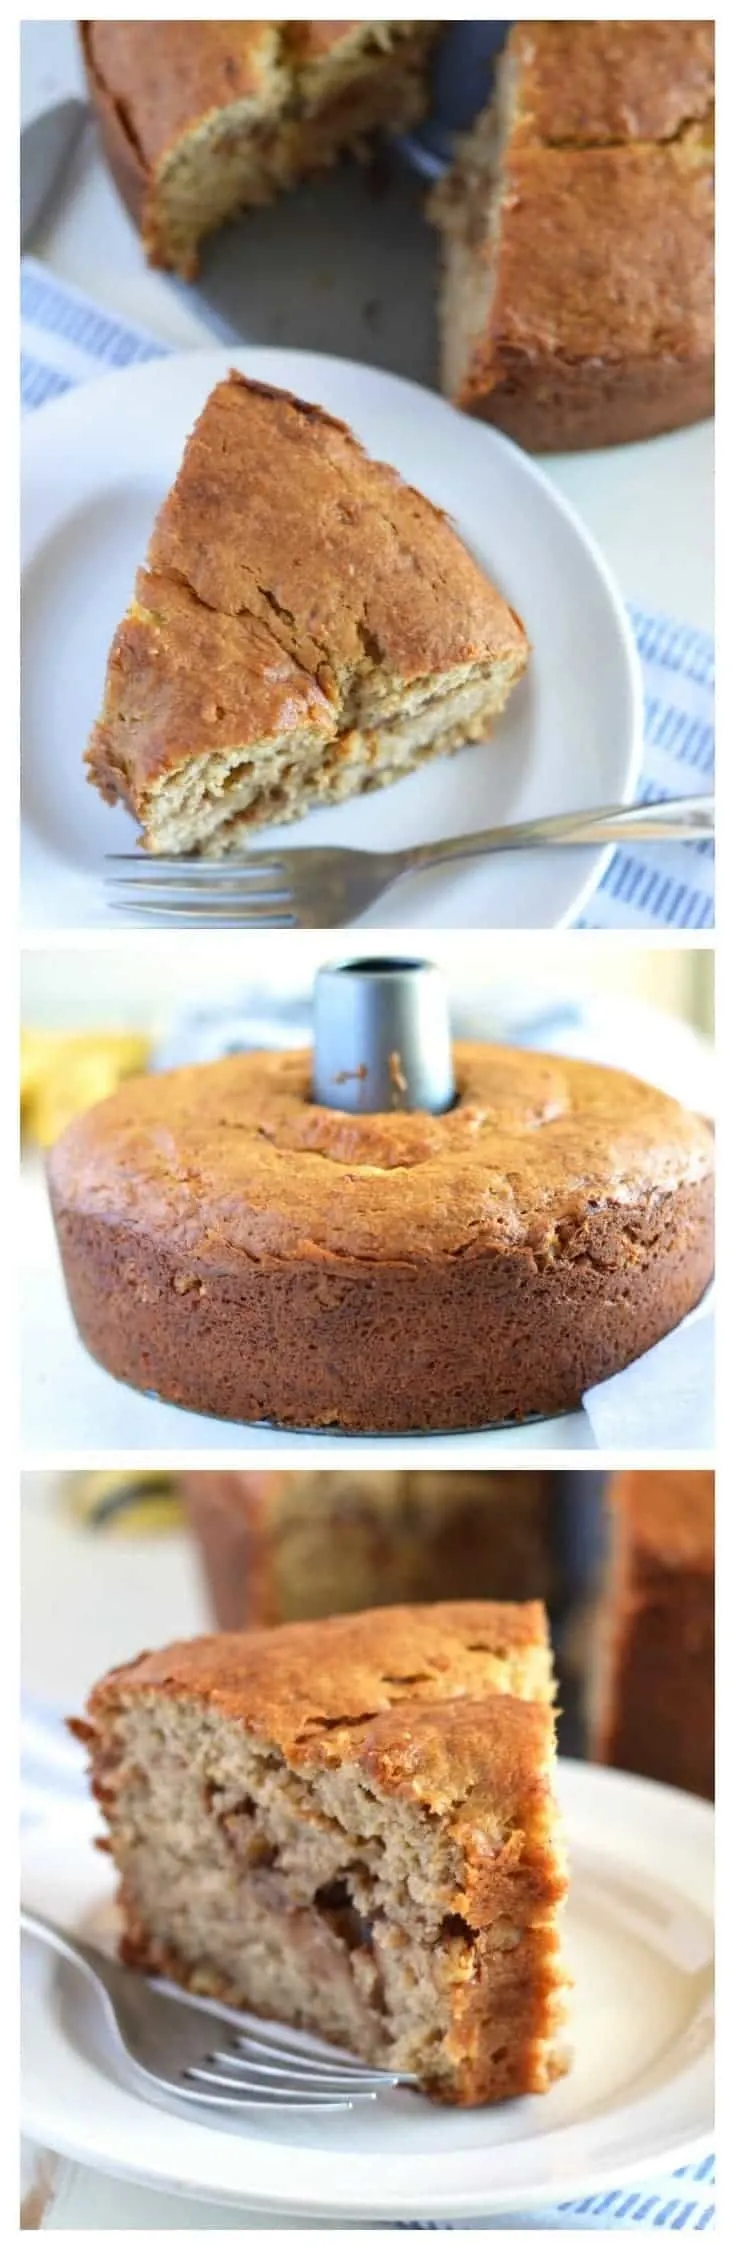 Honey Banana Coffee Cake from What The Fork Food Blog | @WhatTheForkBlog | whattheforkfoodblog.com